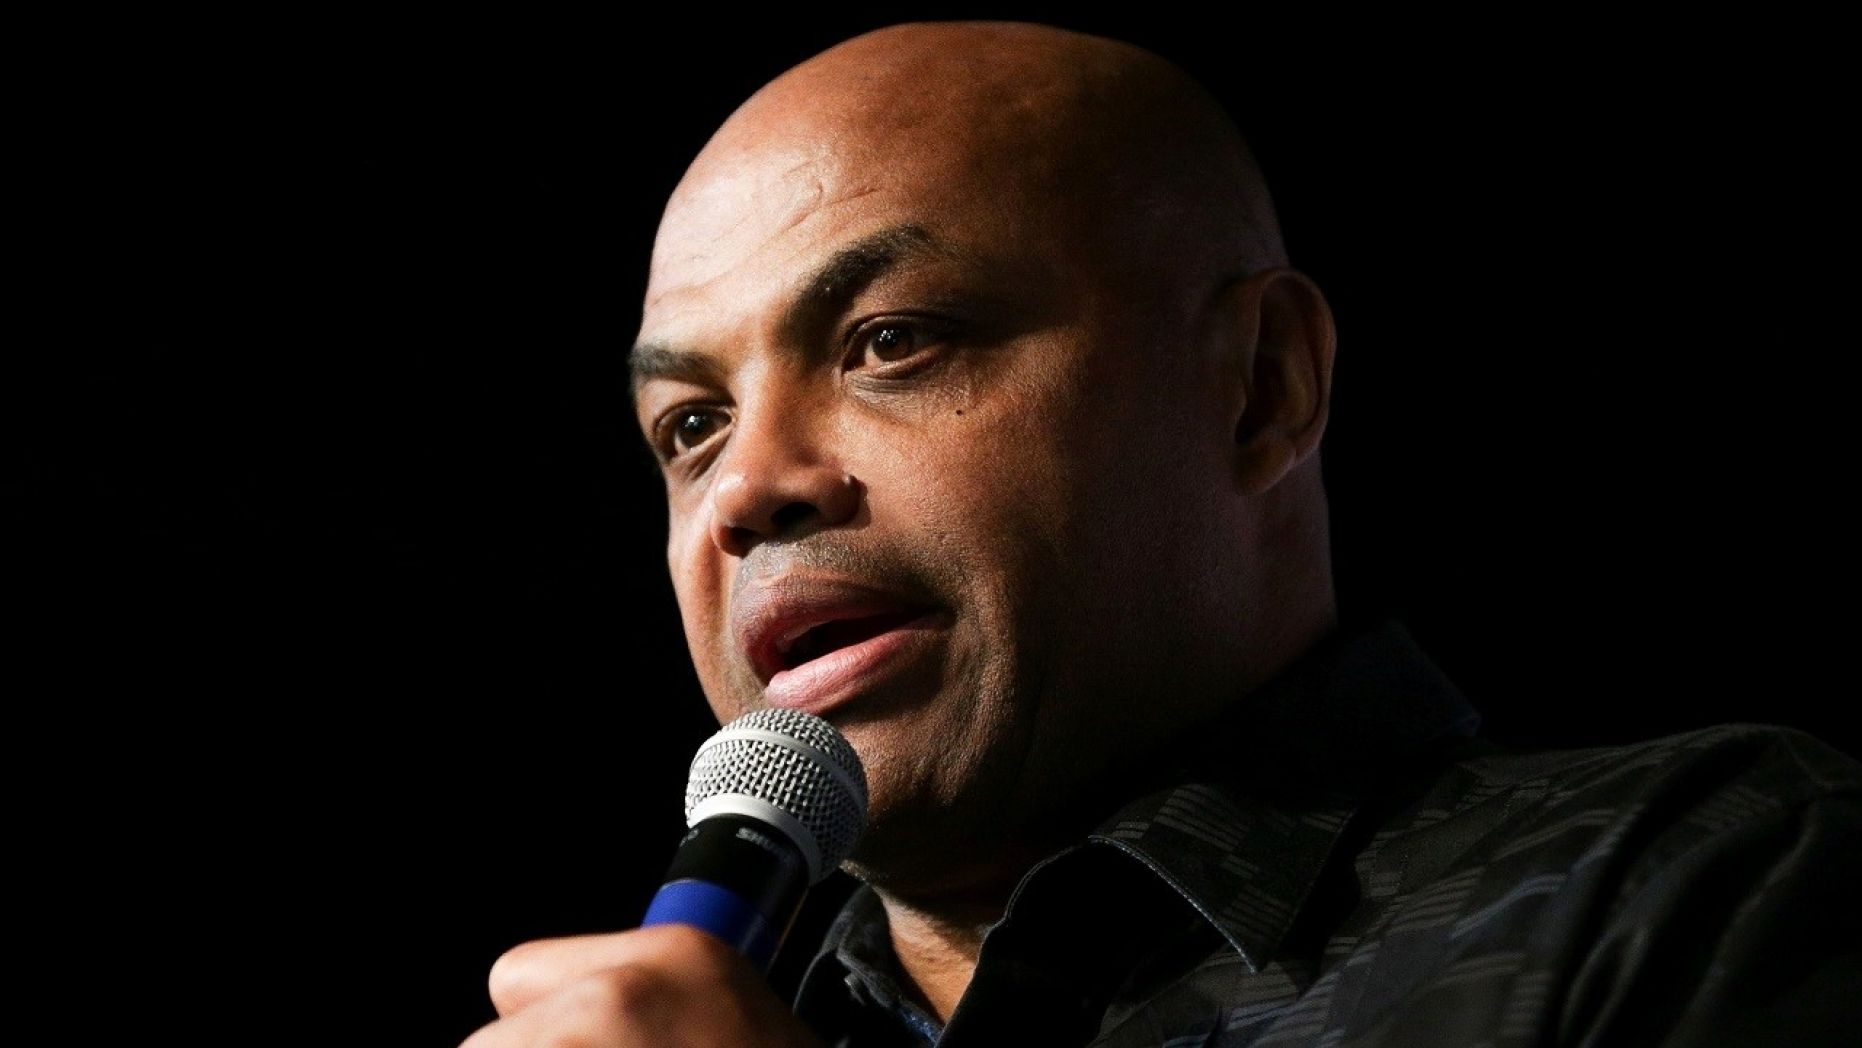 Charles Barkley apologizes for wanting to ‘punch’ Golden State Warriors star